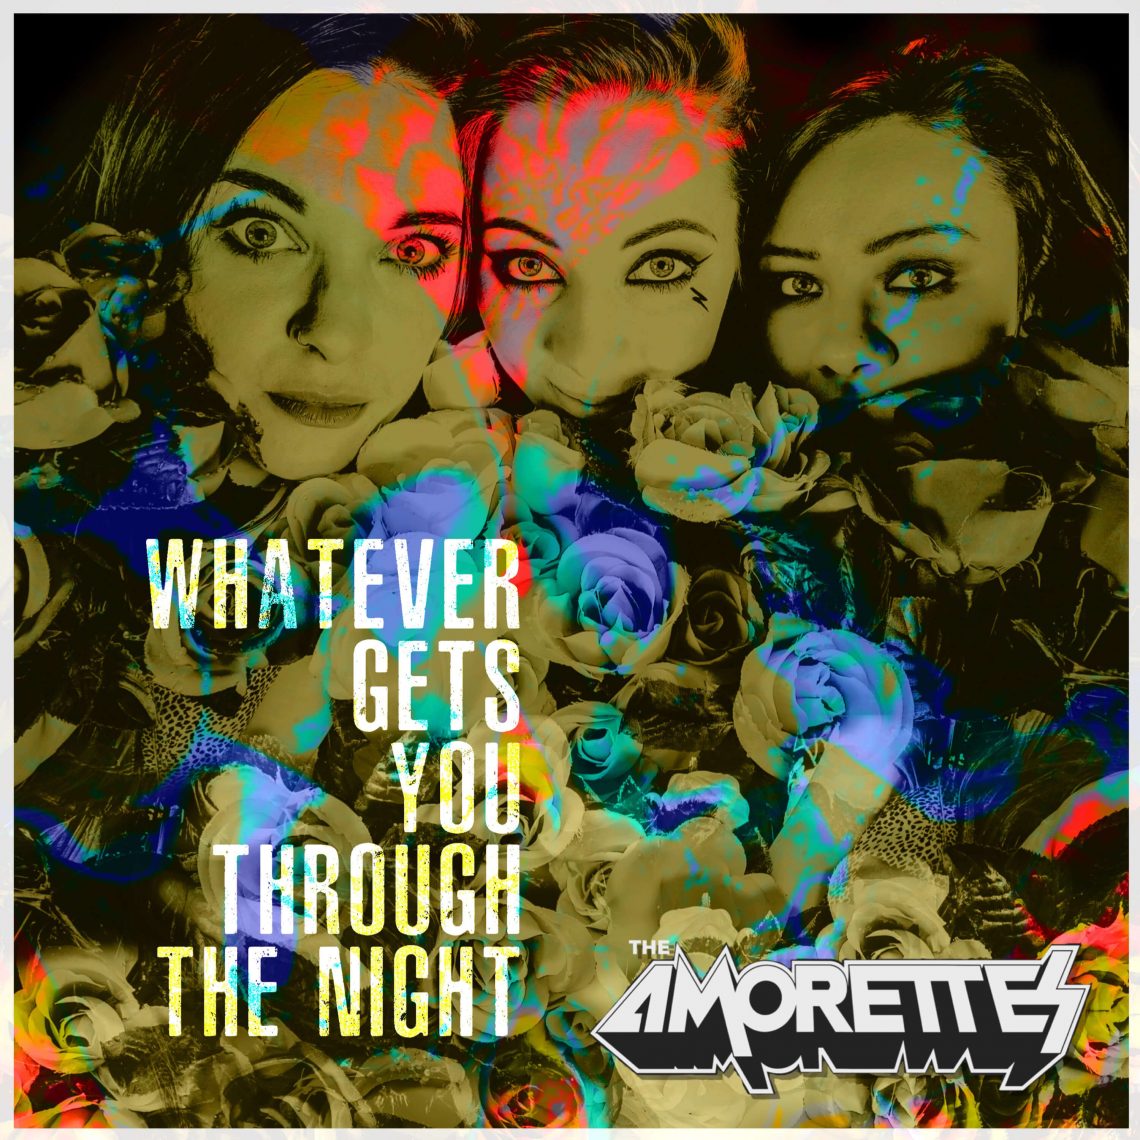 THE AMORETTES release new single and video!